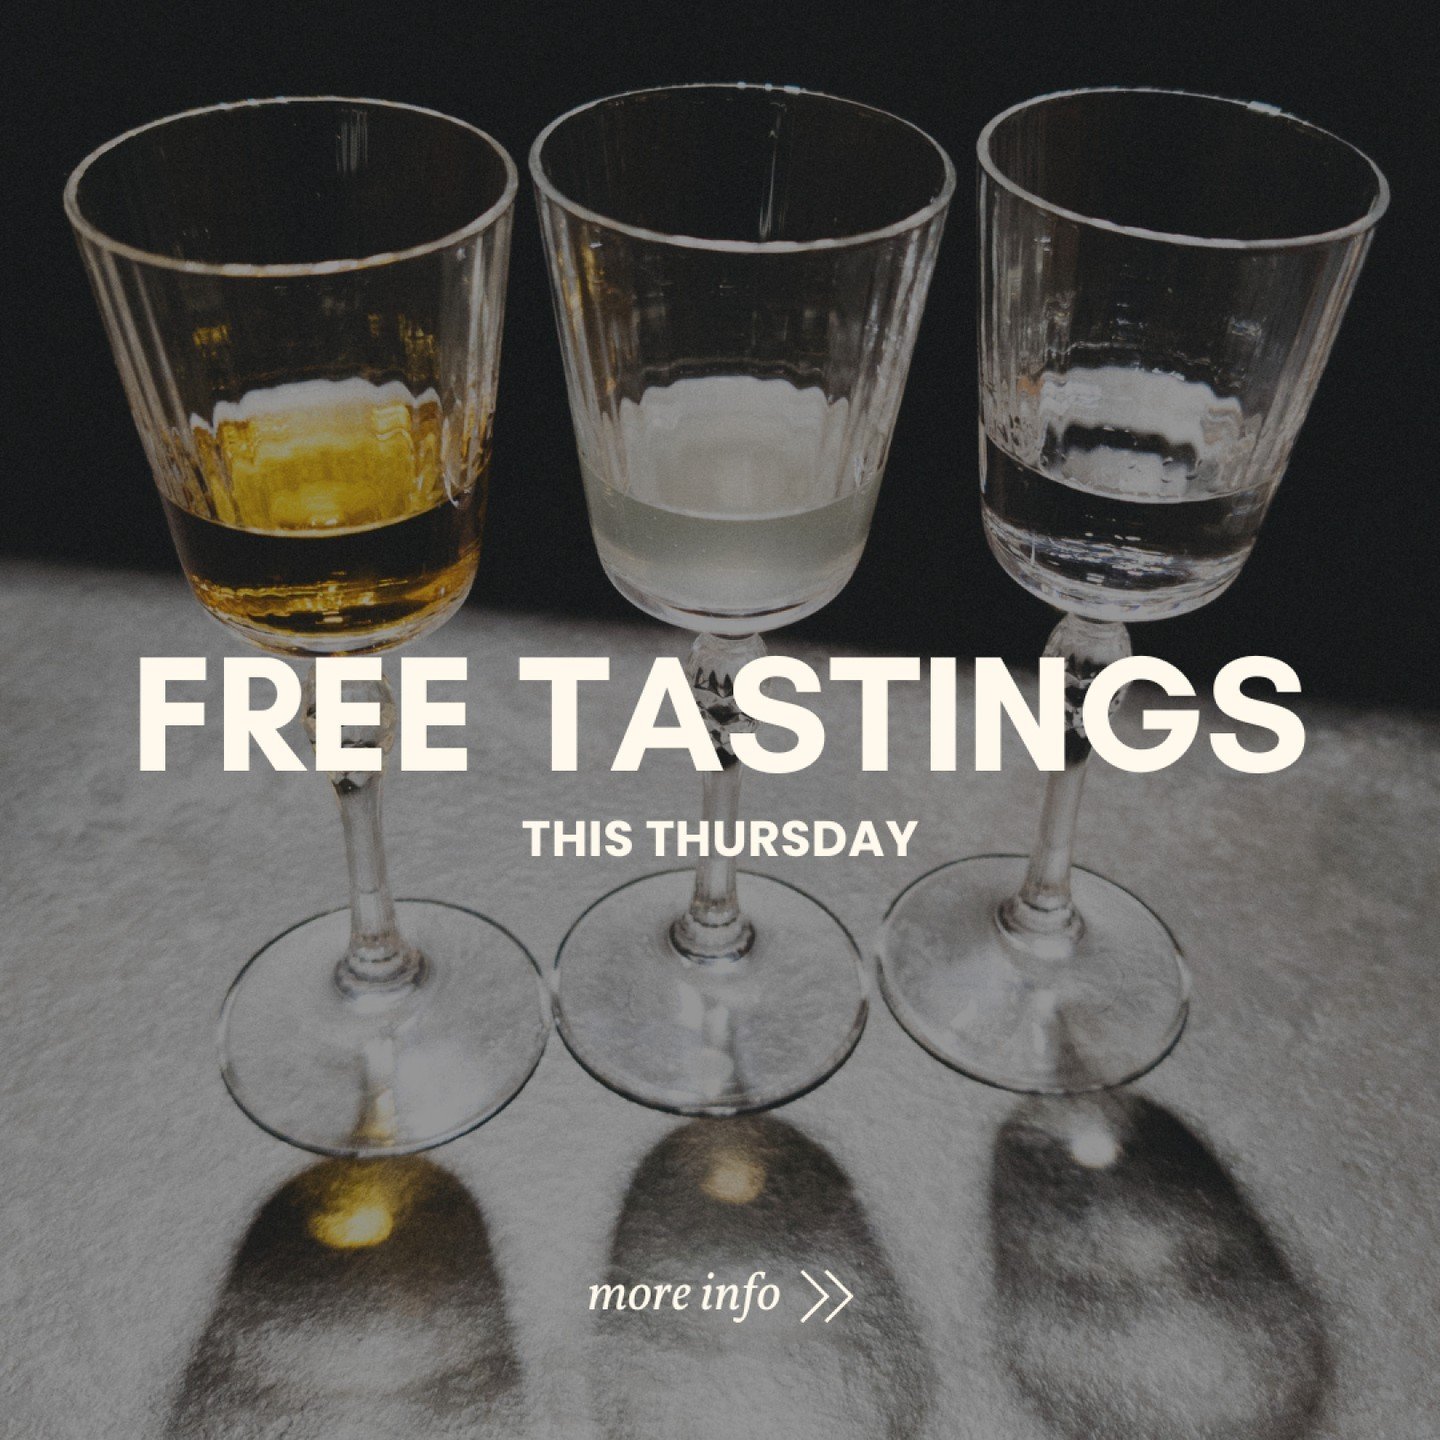 📣 FREE TASTE TESTS 📣

Curious to try our rakia &amp; rum?

Pop in to @pinoakbeerwine this Thursday 2 May between 5 and 7pm, and we'll welcome you at the door with a free taste test of our yum spirits 🤤.

You can choose from our Pear Rakia, Aged Ca